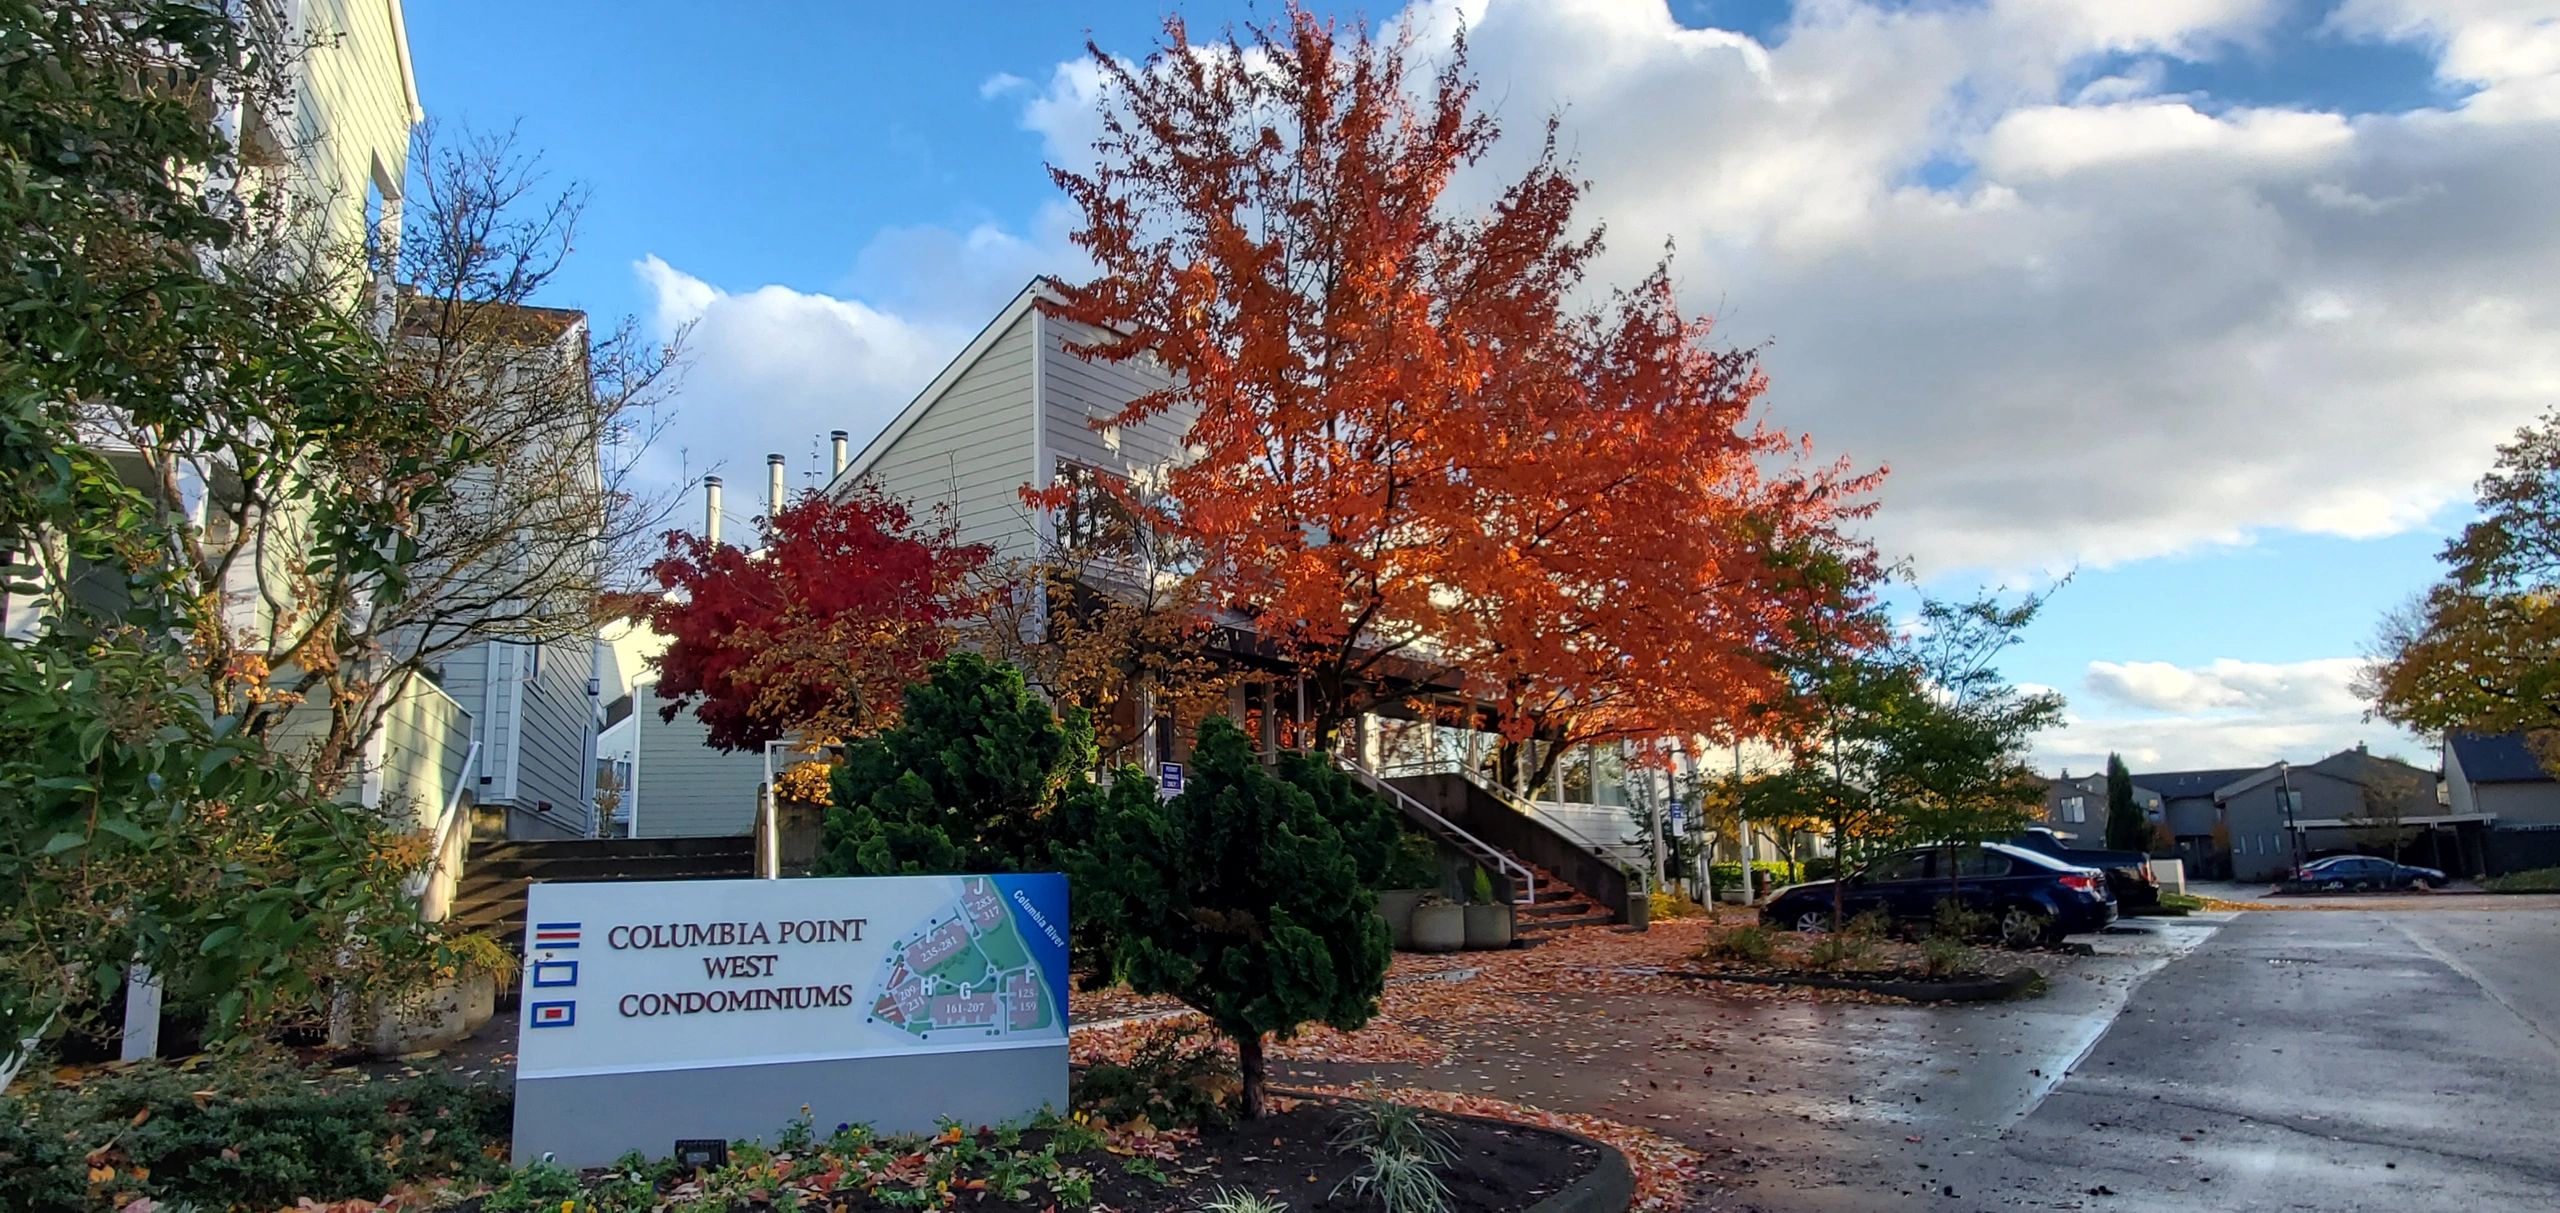 Columbia Point West is a three-story, 96 unit, Condominium Community located on the Columbia River.